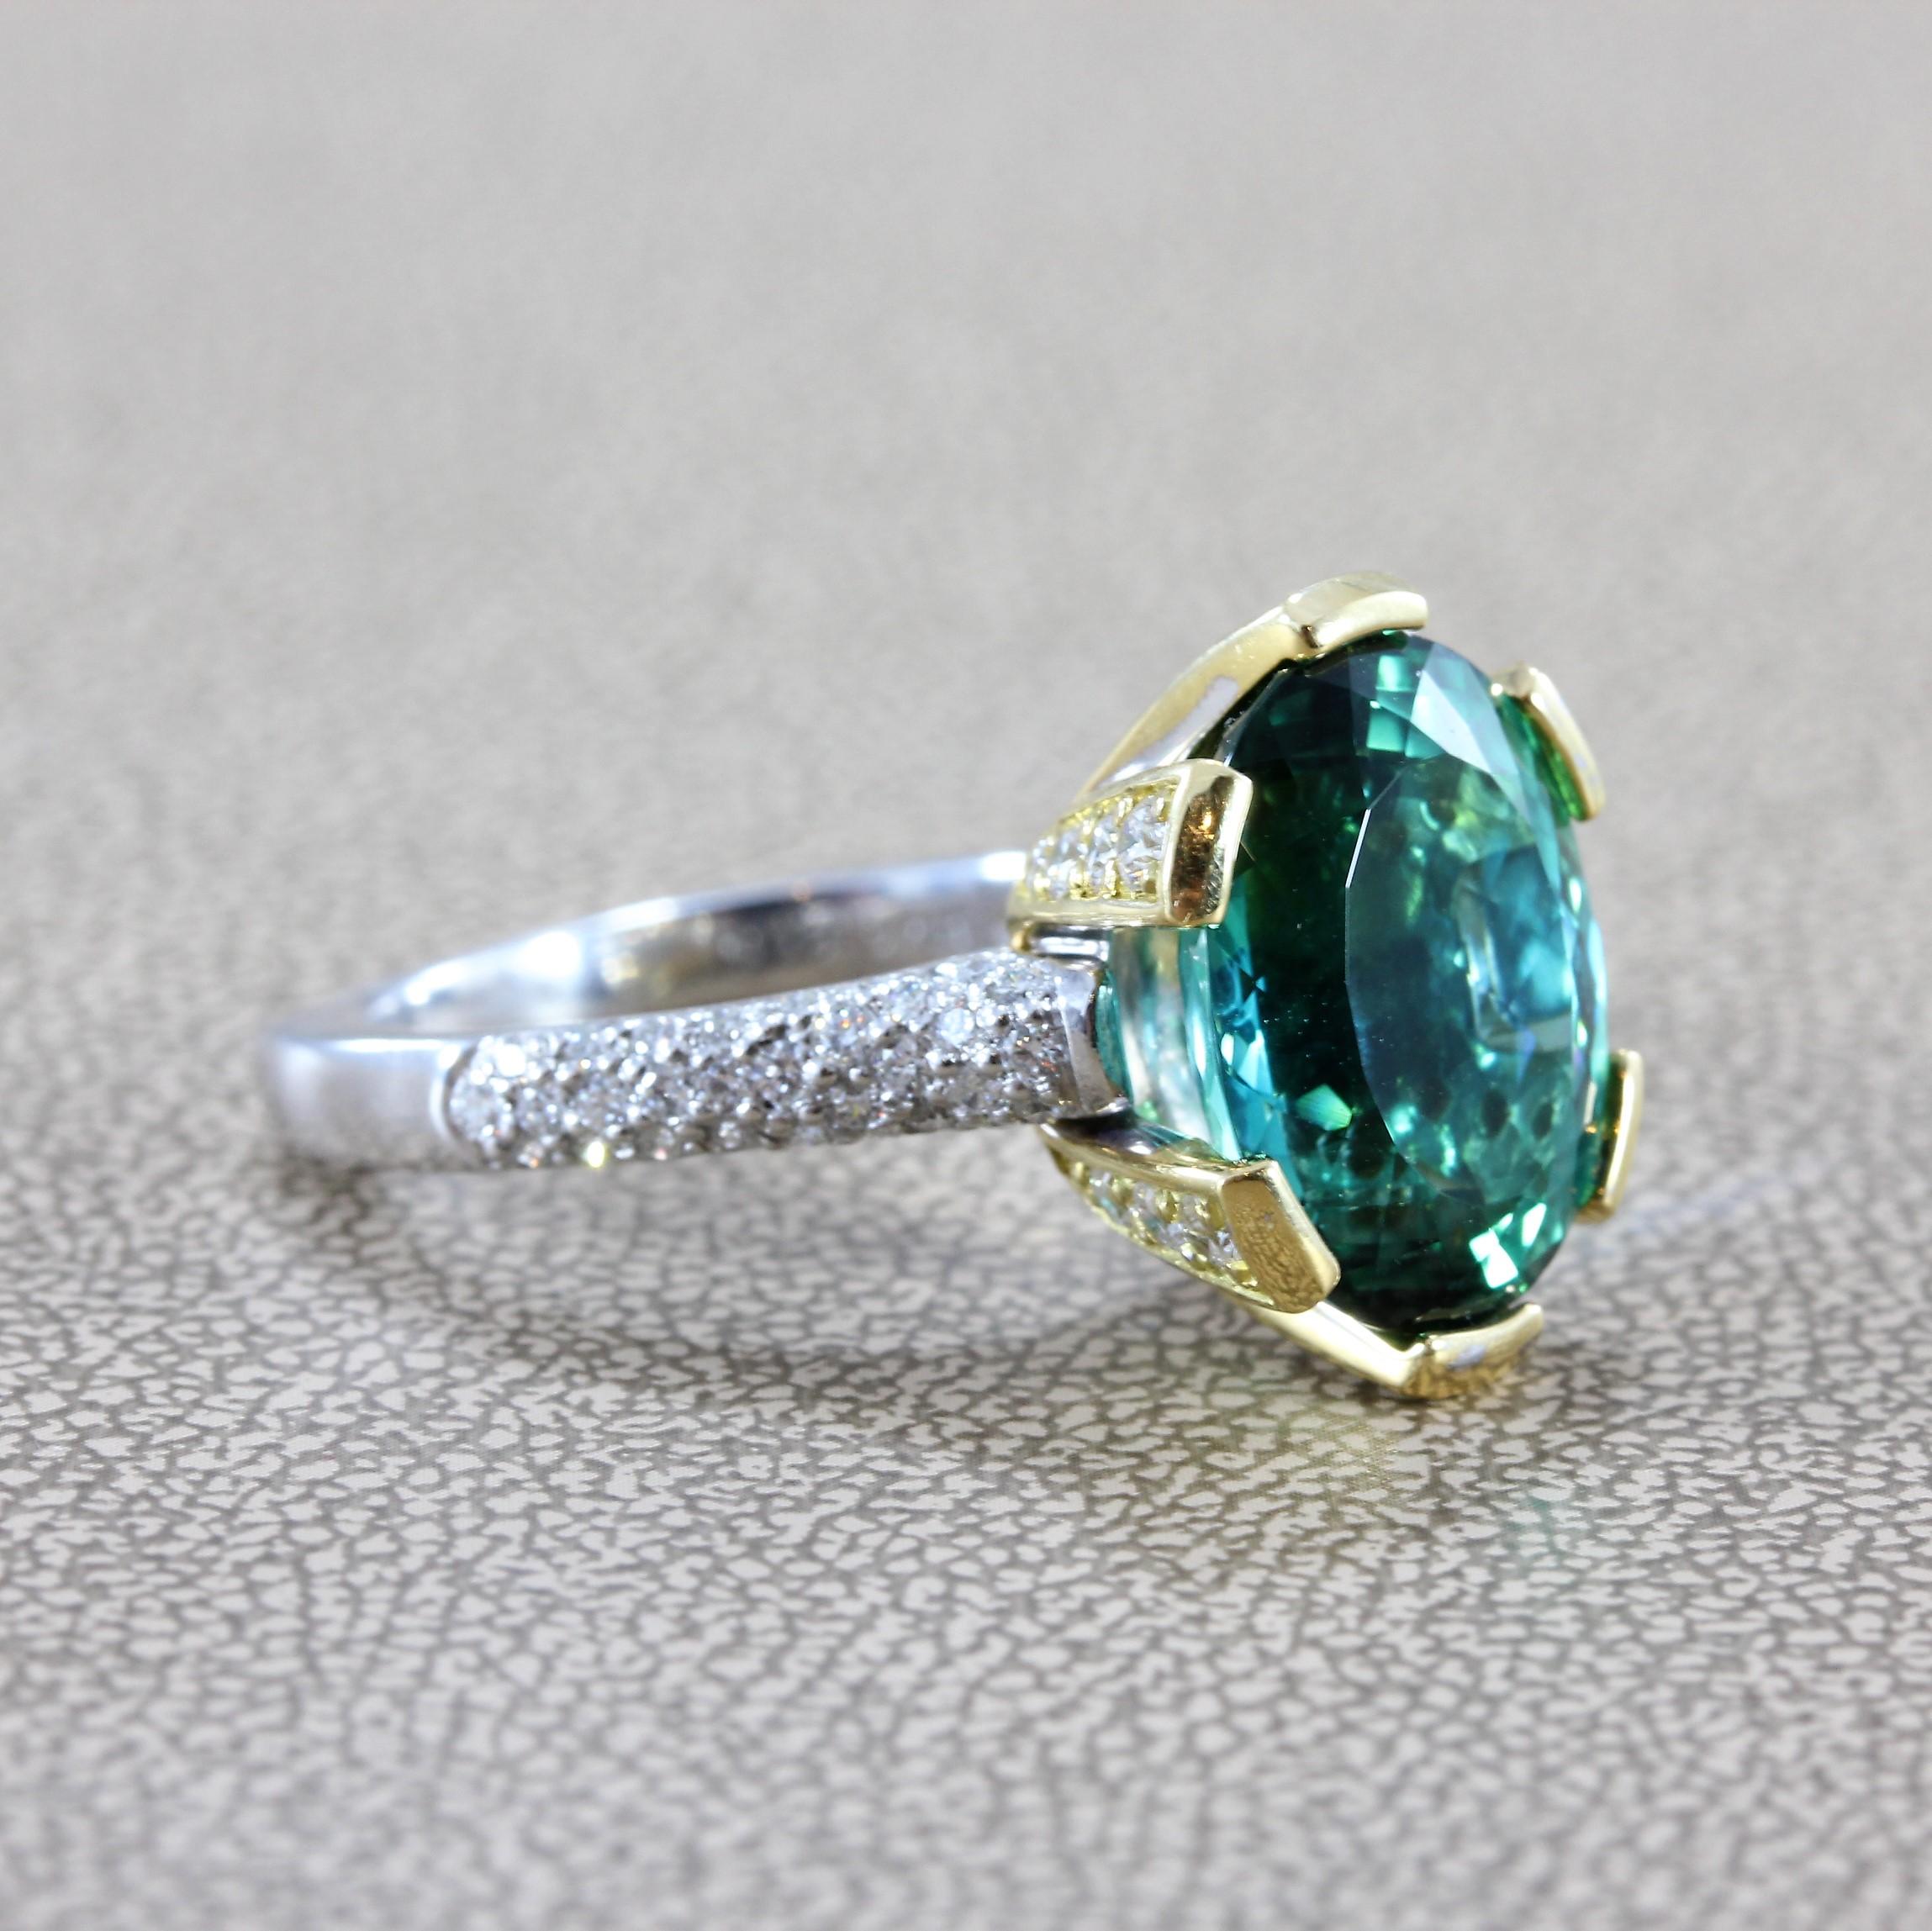 A magnificent gem tourmaline (8.30 carat), certified by GIA as natural Blue-Green color, set in 18K yellow gold. Accenting the ring are about 1.26 carats of VS quality colorless diamonds set in 18K yellow and white gold. A beautiful tourmaline